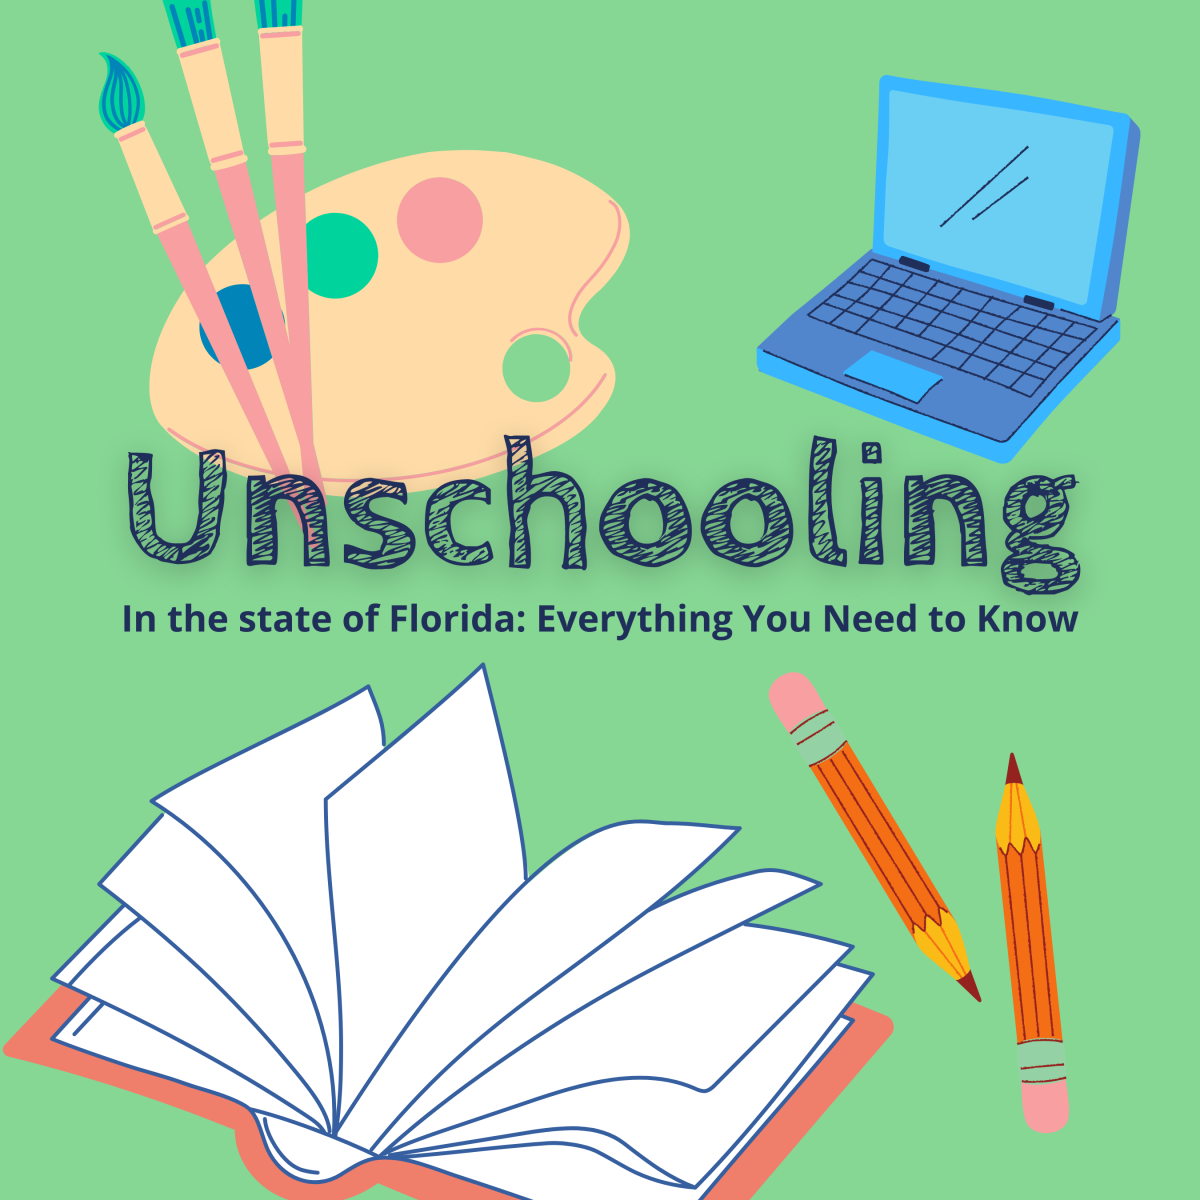 How to Unschool in the State of Florida